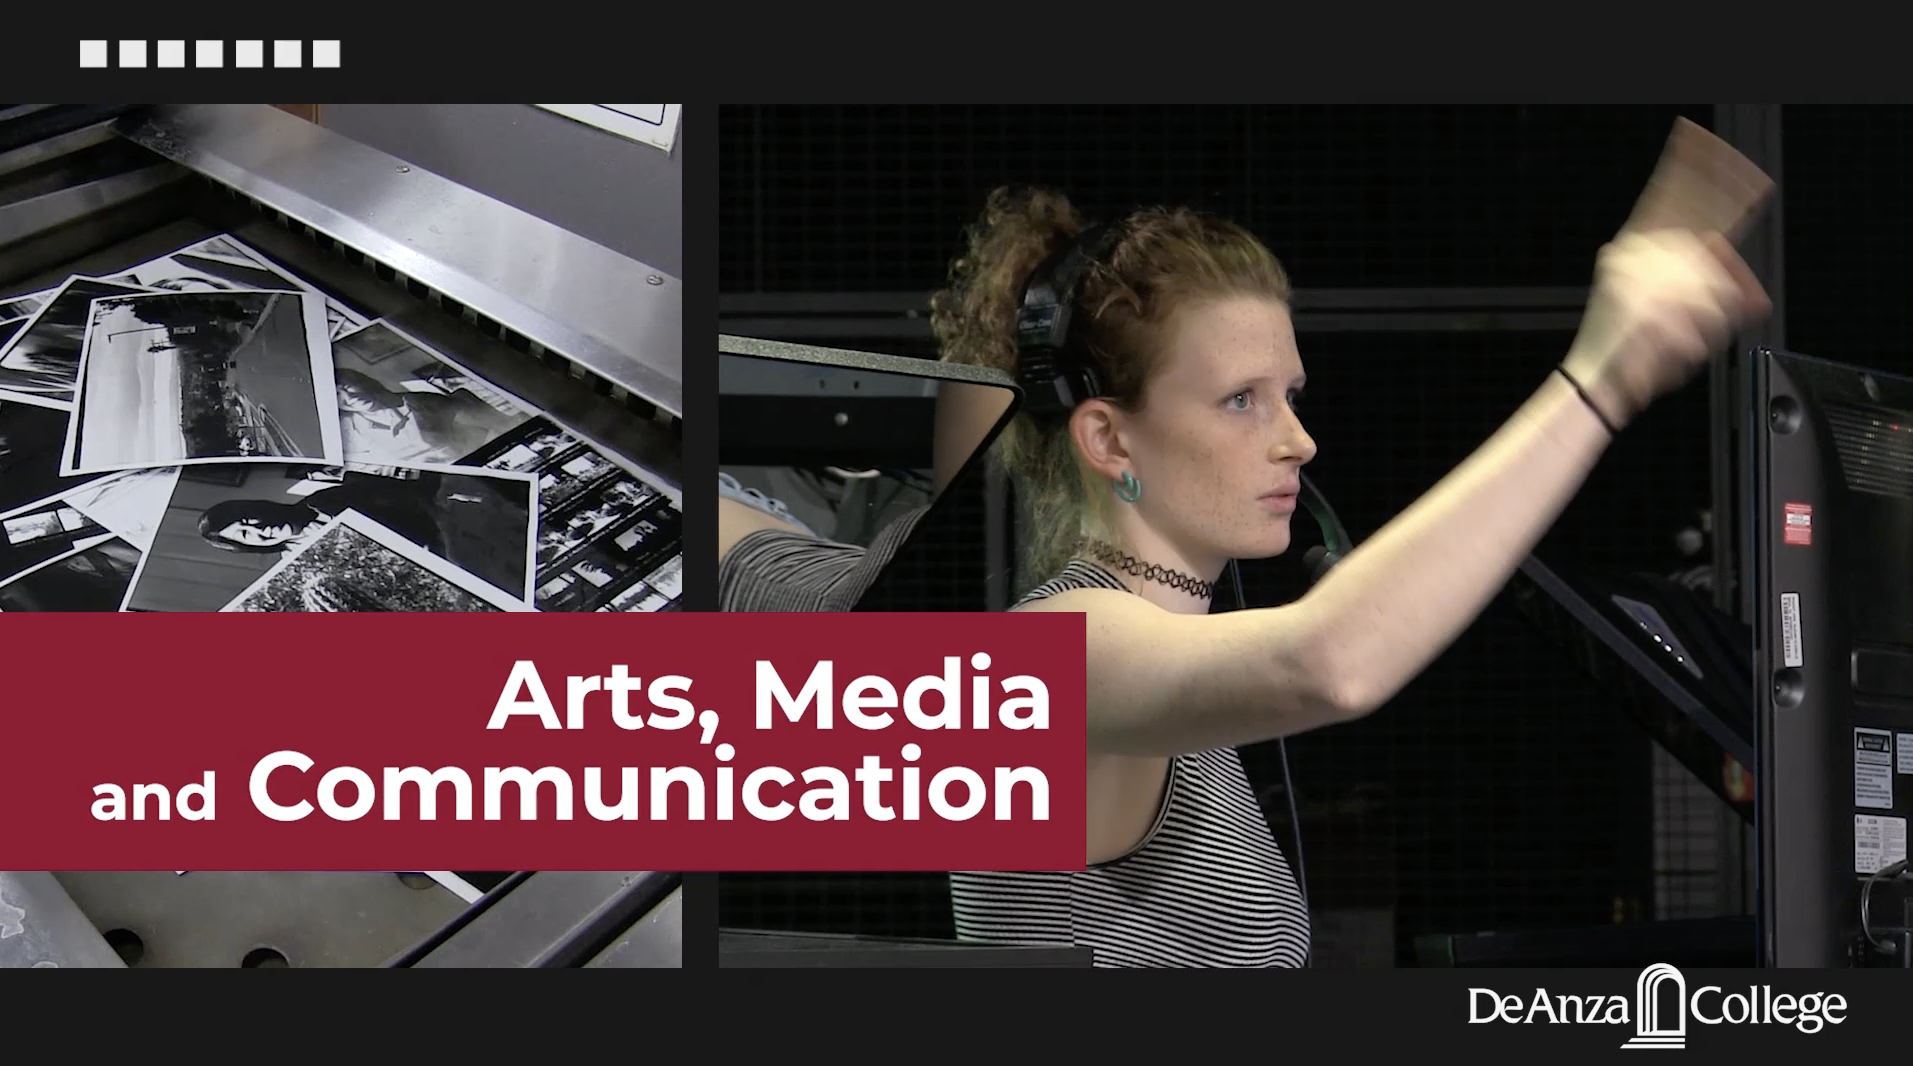 Arts, Media and Communication: image of young woman with arm upraised